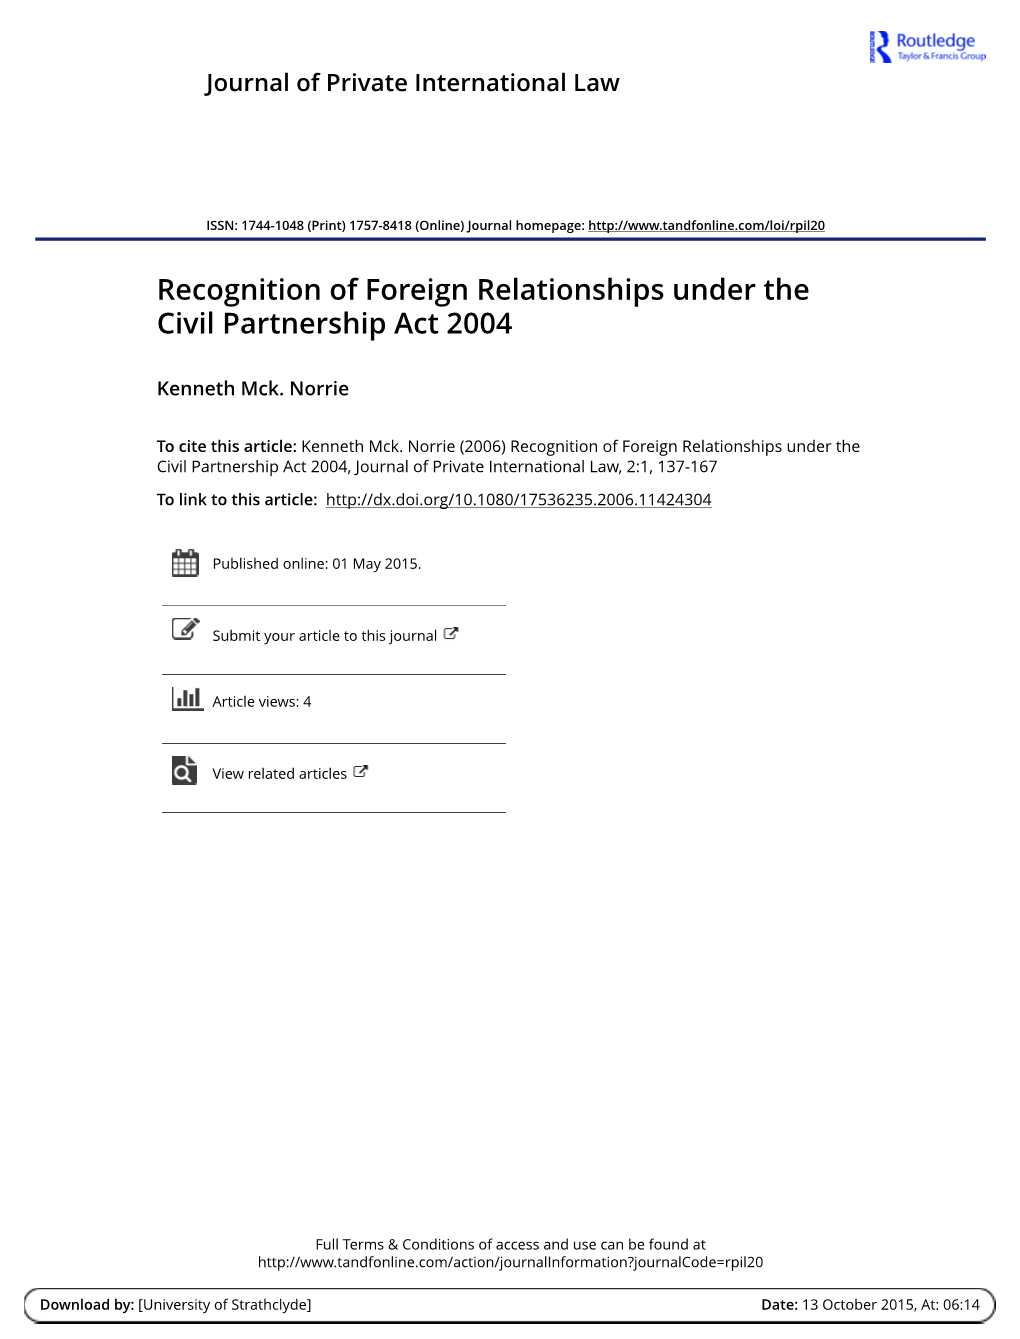 Recognition of Foreign Relationships Under the Civil Partnership Act 2004